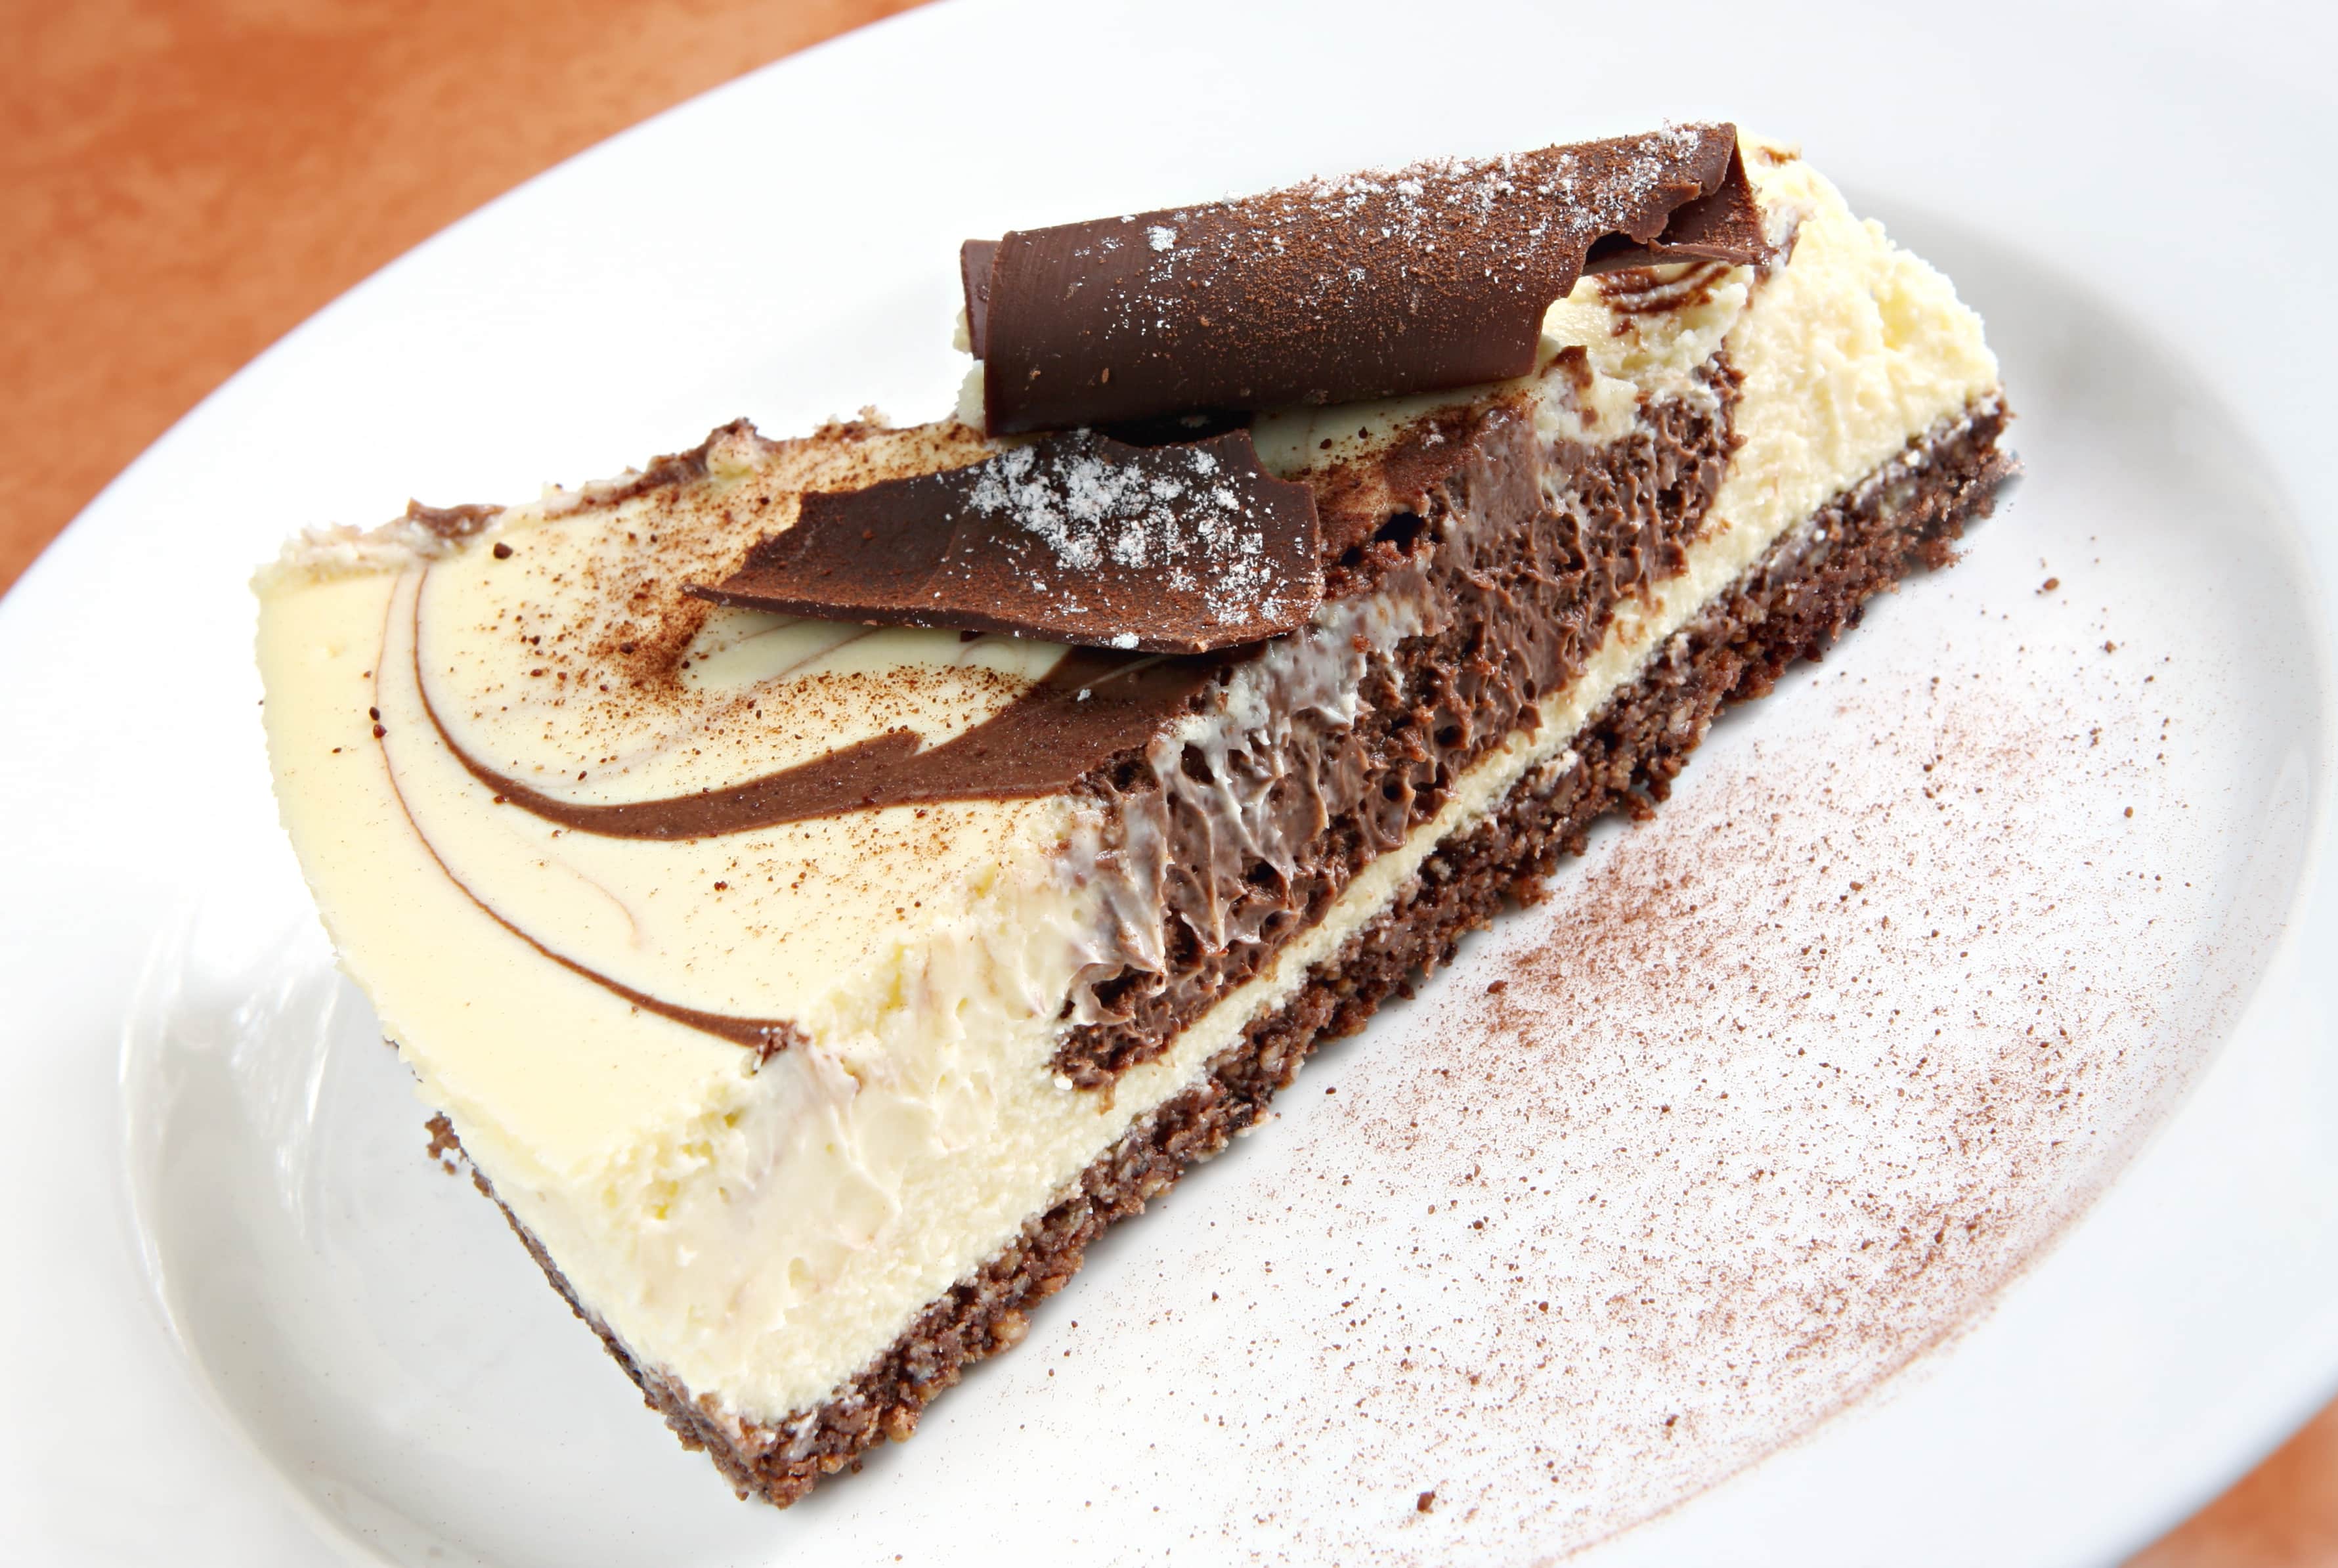 Chocolate cheesecake, baked to perfection.  On white plate with terracotta background.  Delicious!